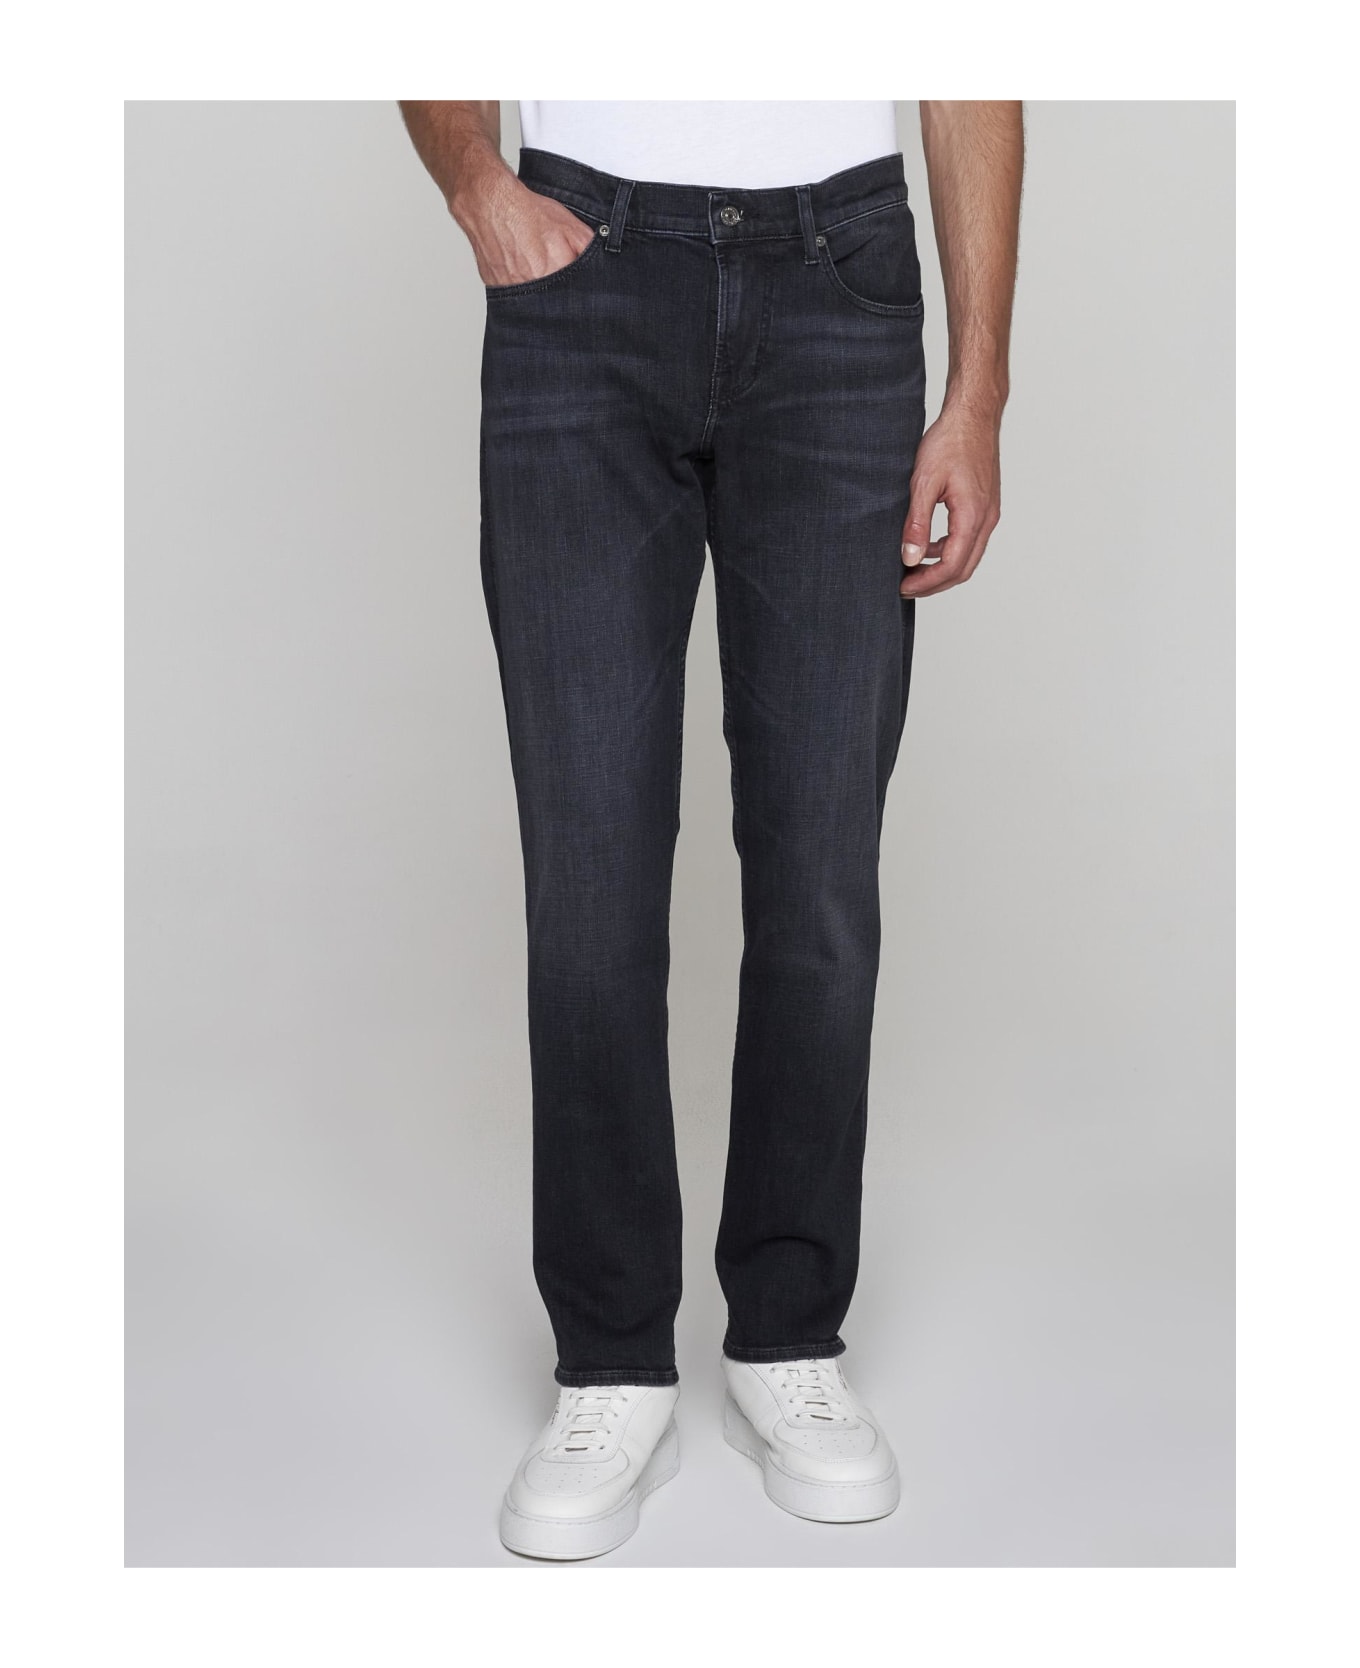 7 For All Mankind Slimmy Tapered Stretch Tek Idealist Jeans - BLACK デニム